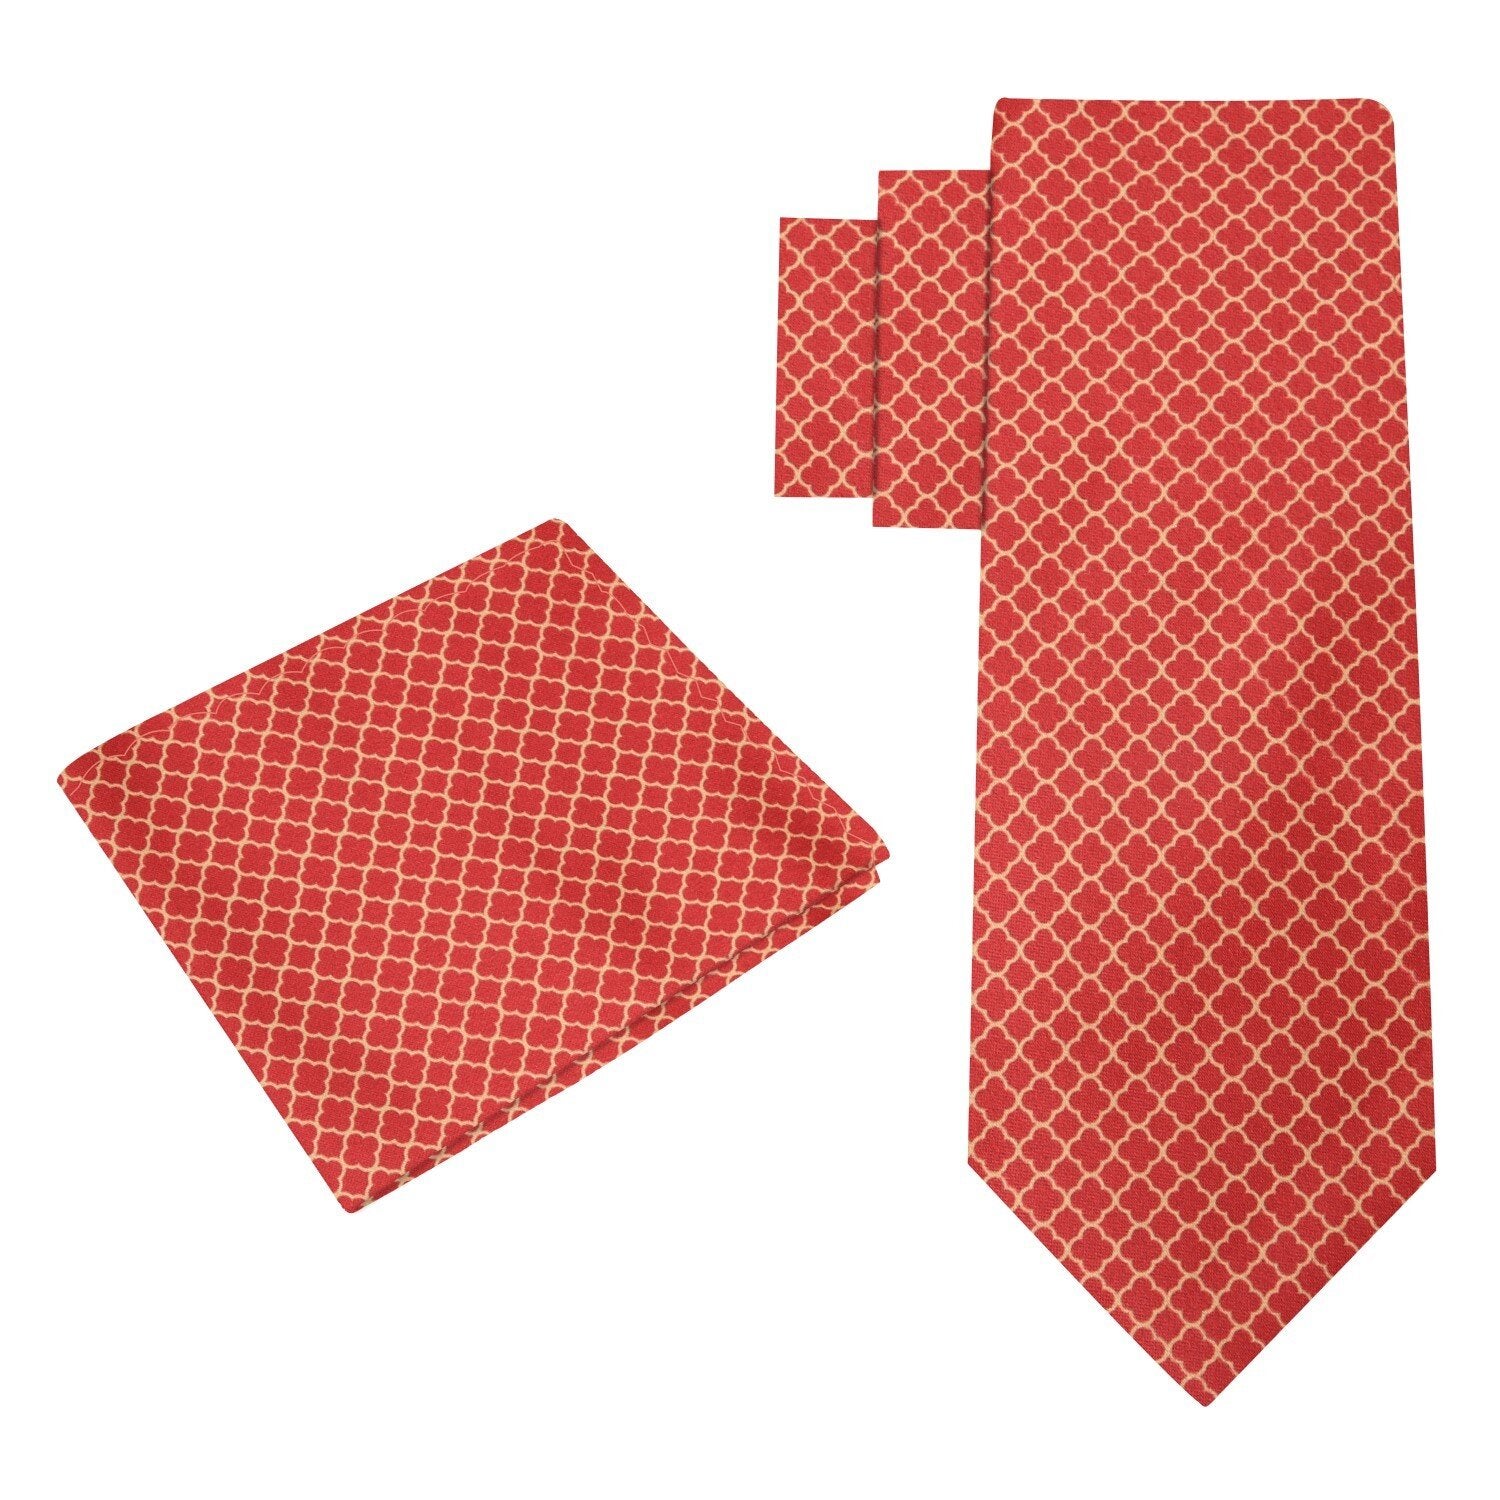 Alt View: Red, Old Gold Quatrefoil Tie and Square